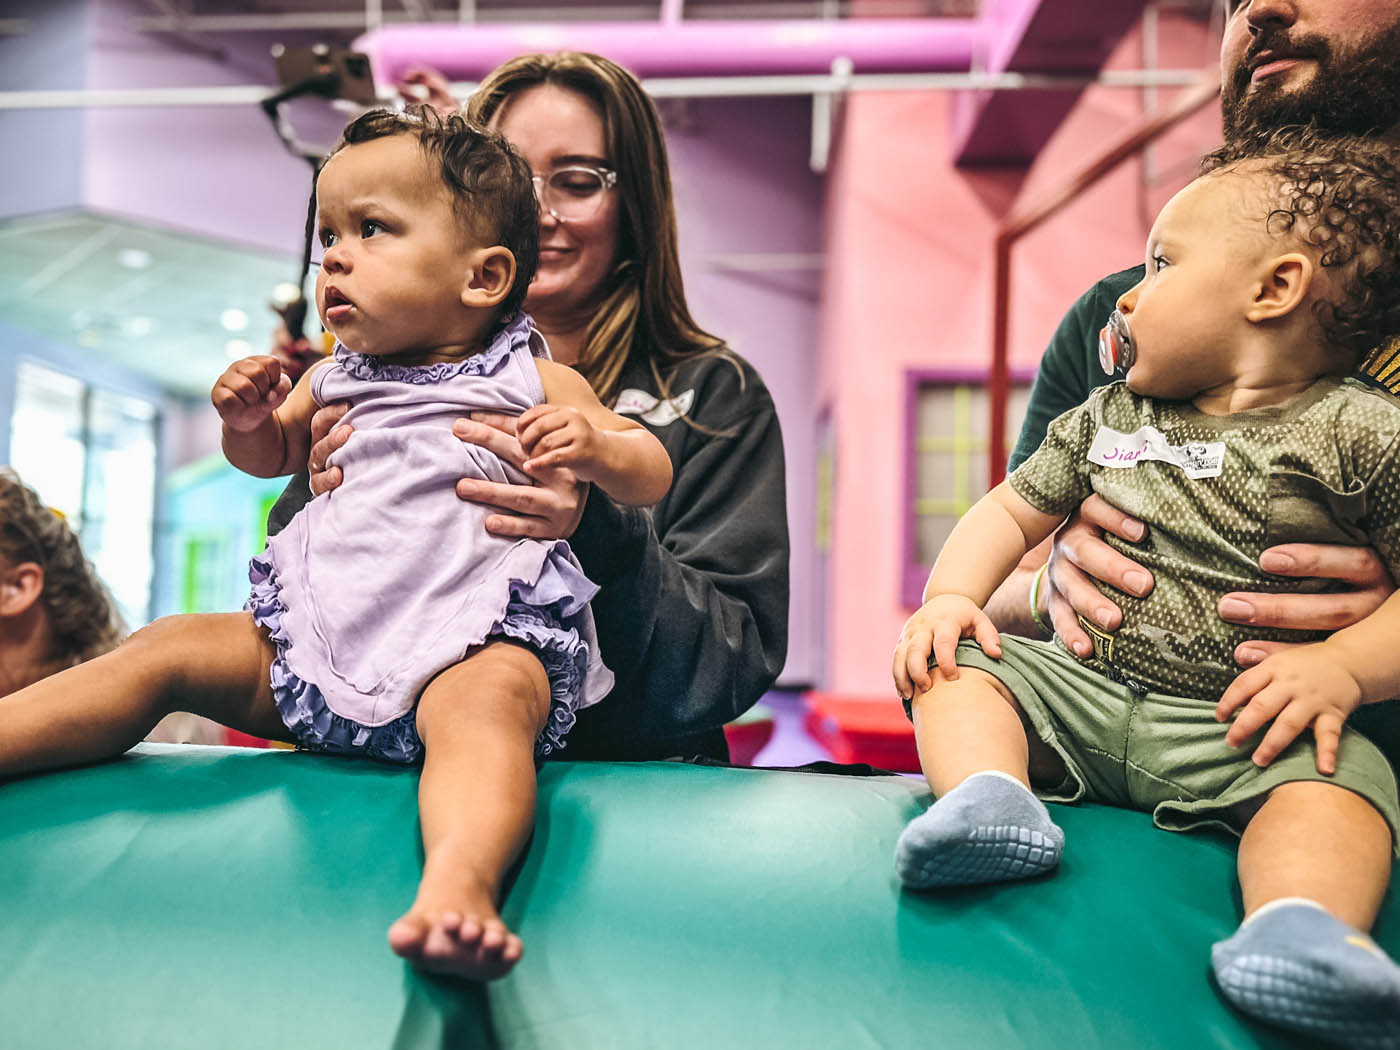 Adults with babies in Romp n' Roll's baby activities in St. Petersburg, FL.